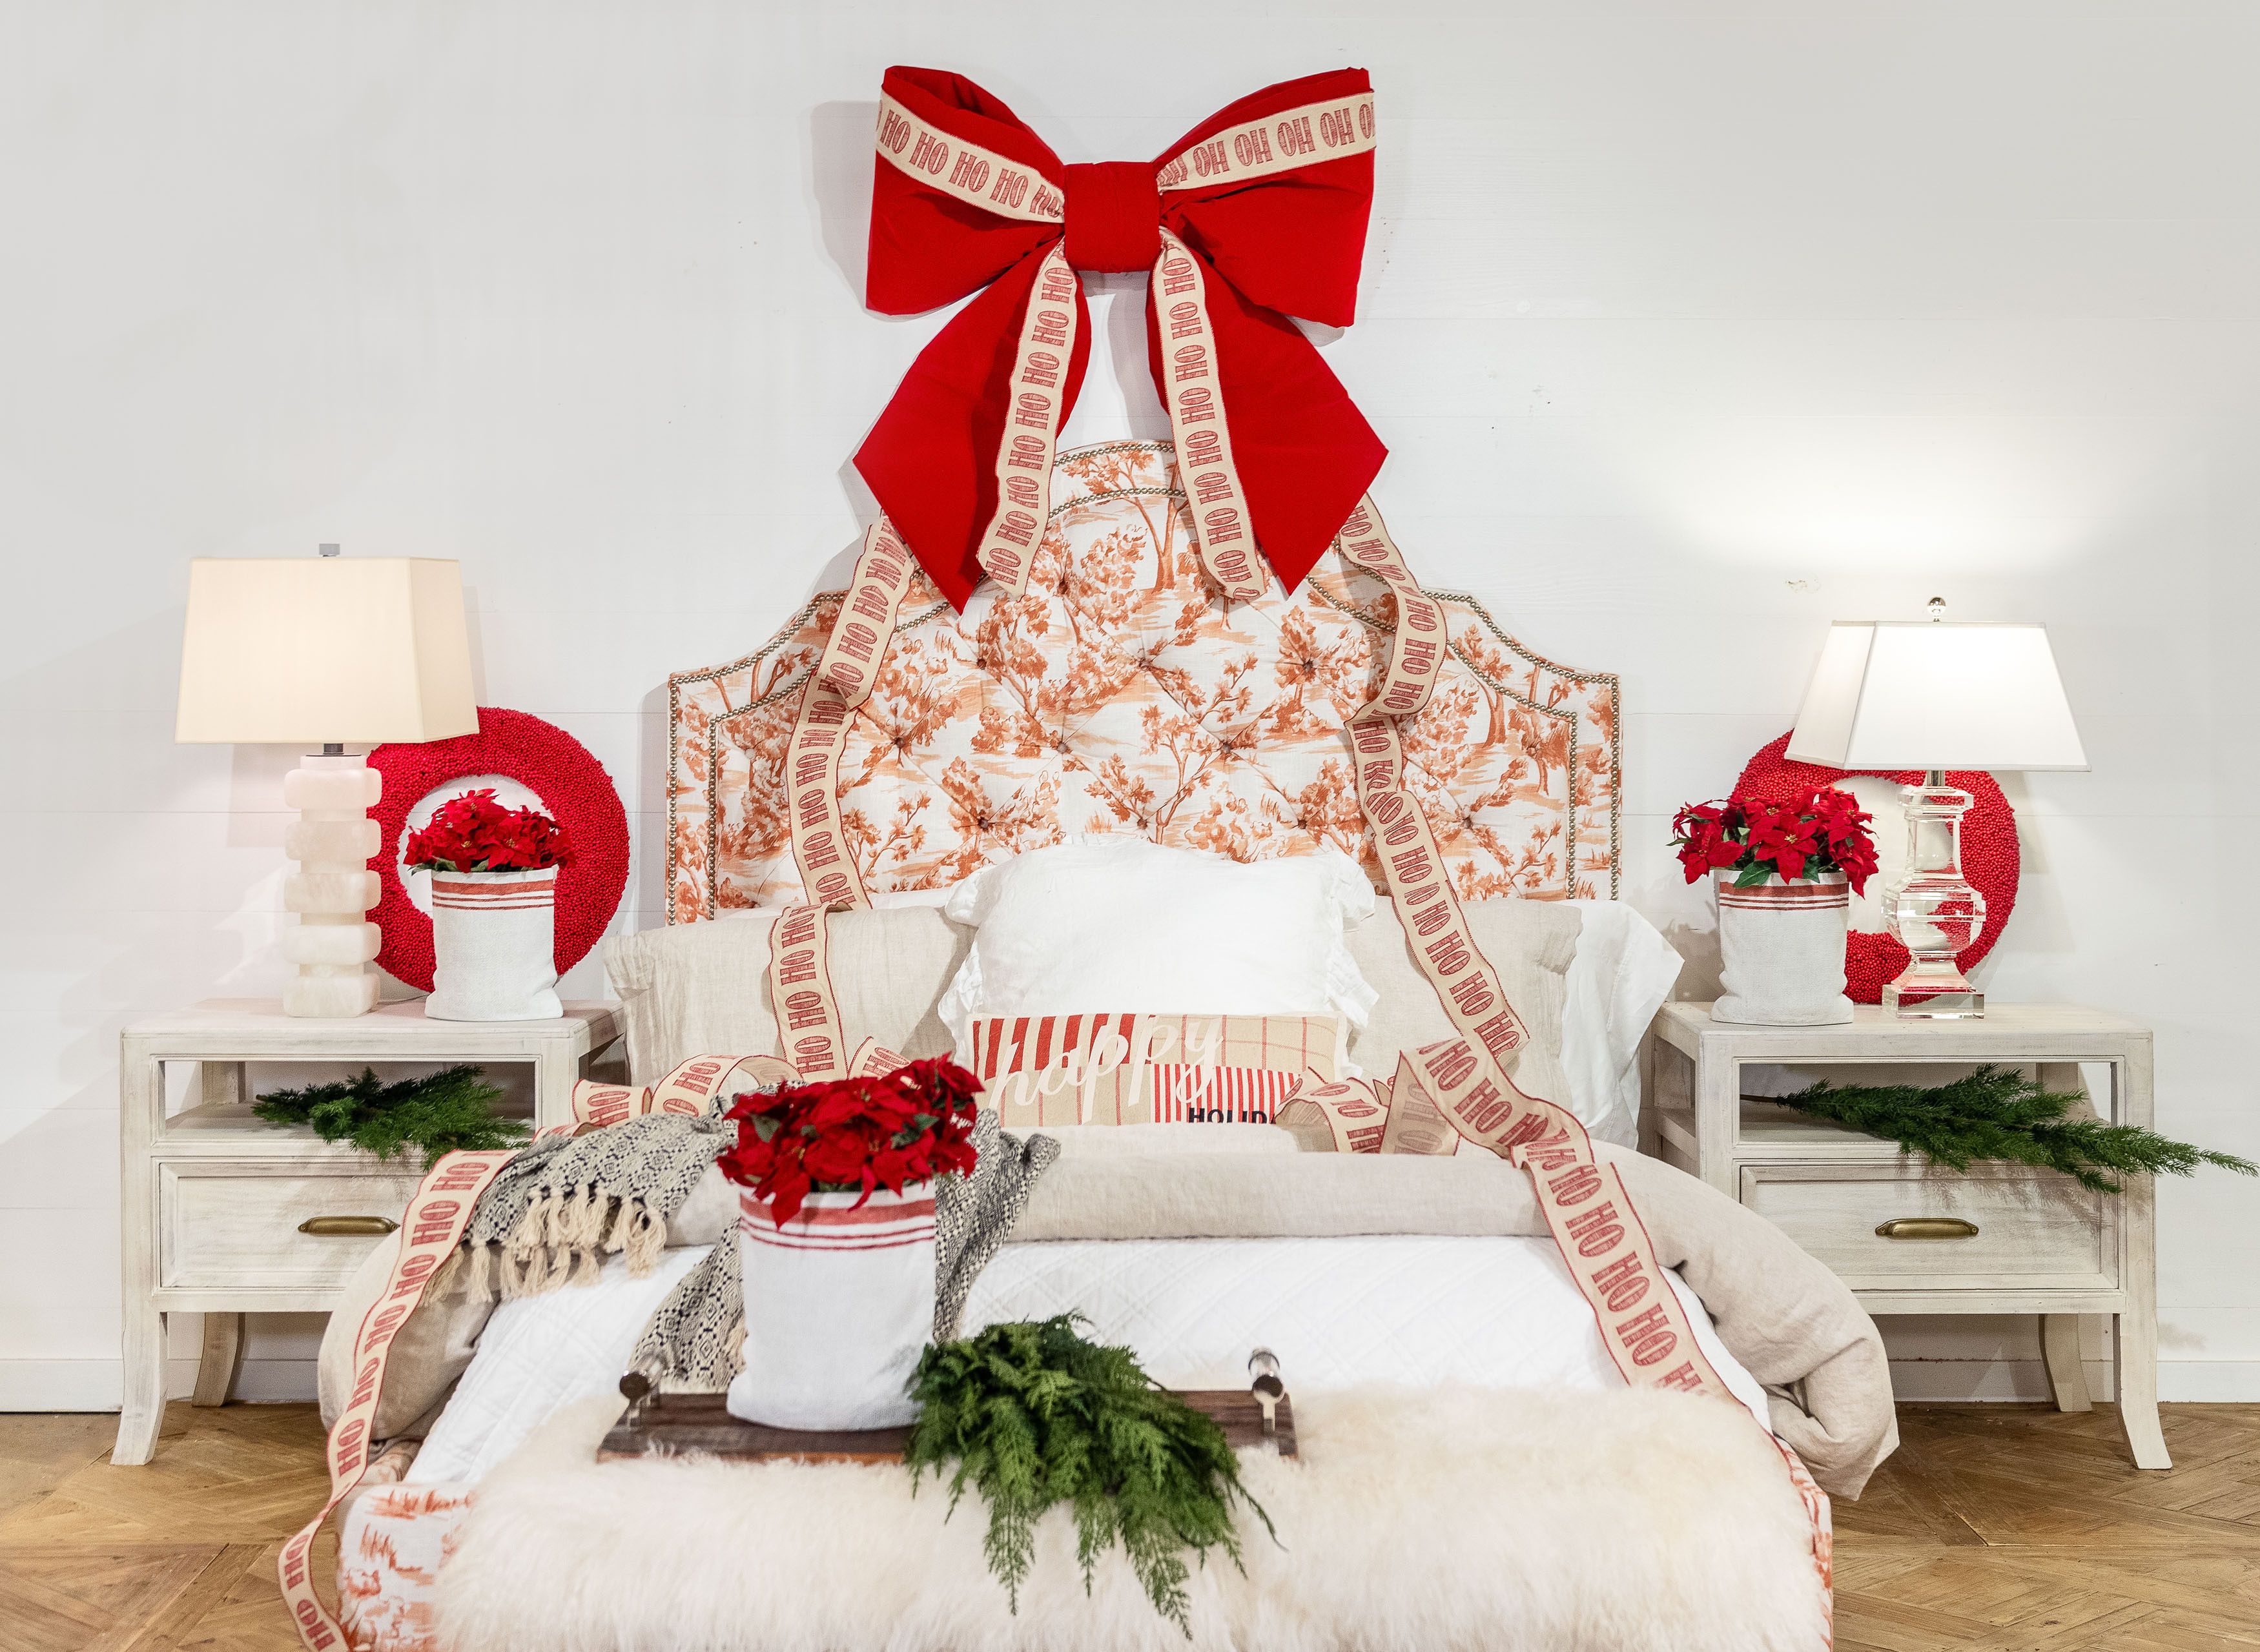 Simple Christmas Decorations For Bedroom